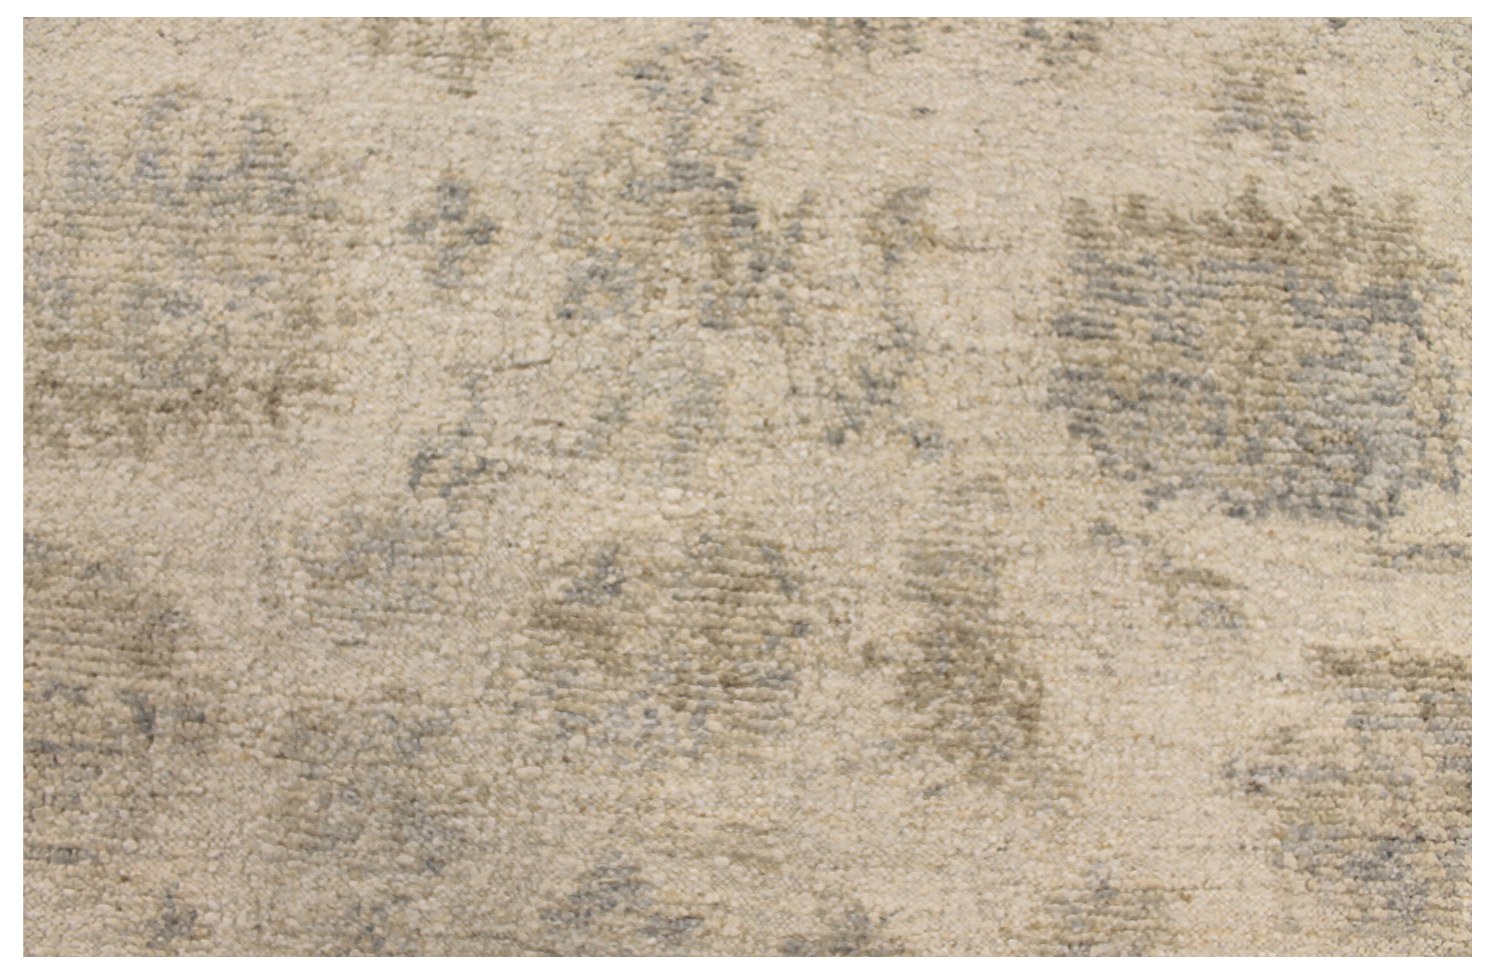 6x9 Oushak Hand Knotted Wool Area Rug - MR028644